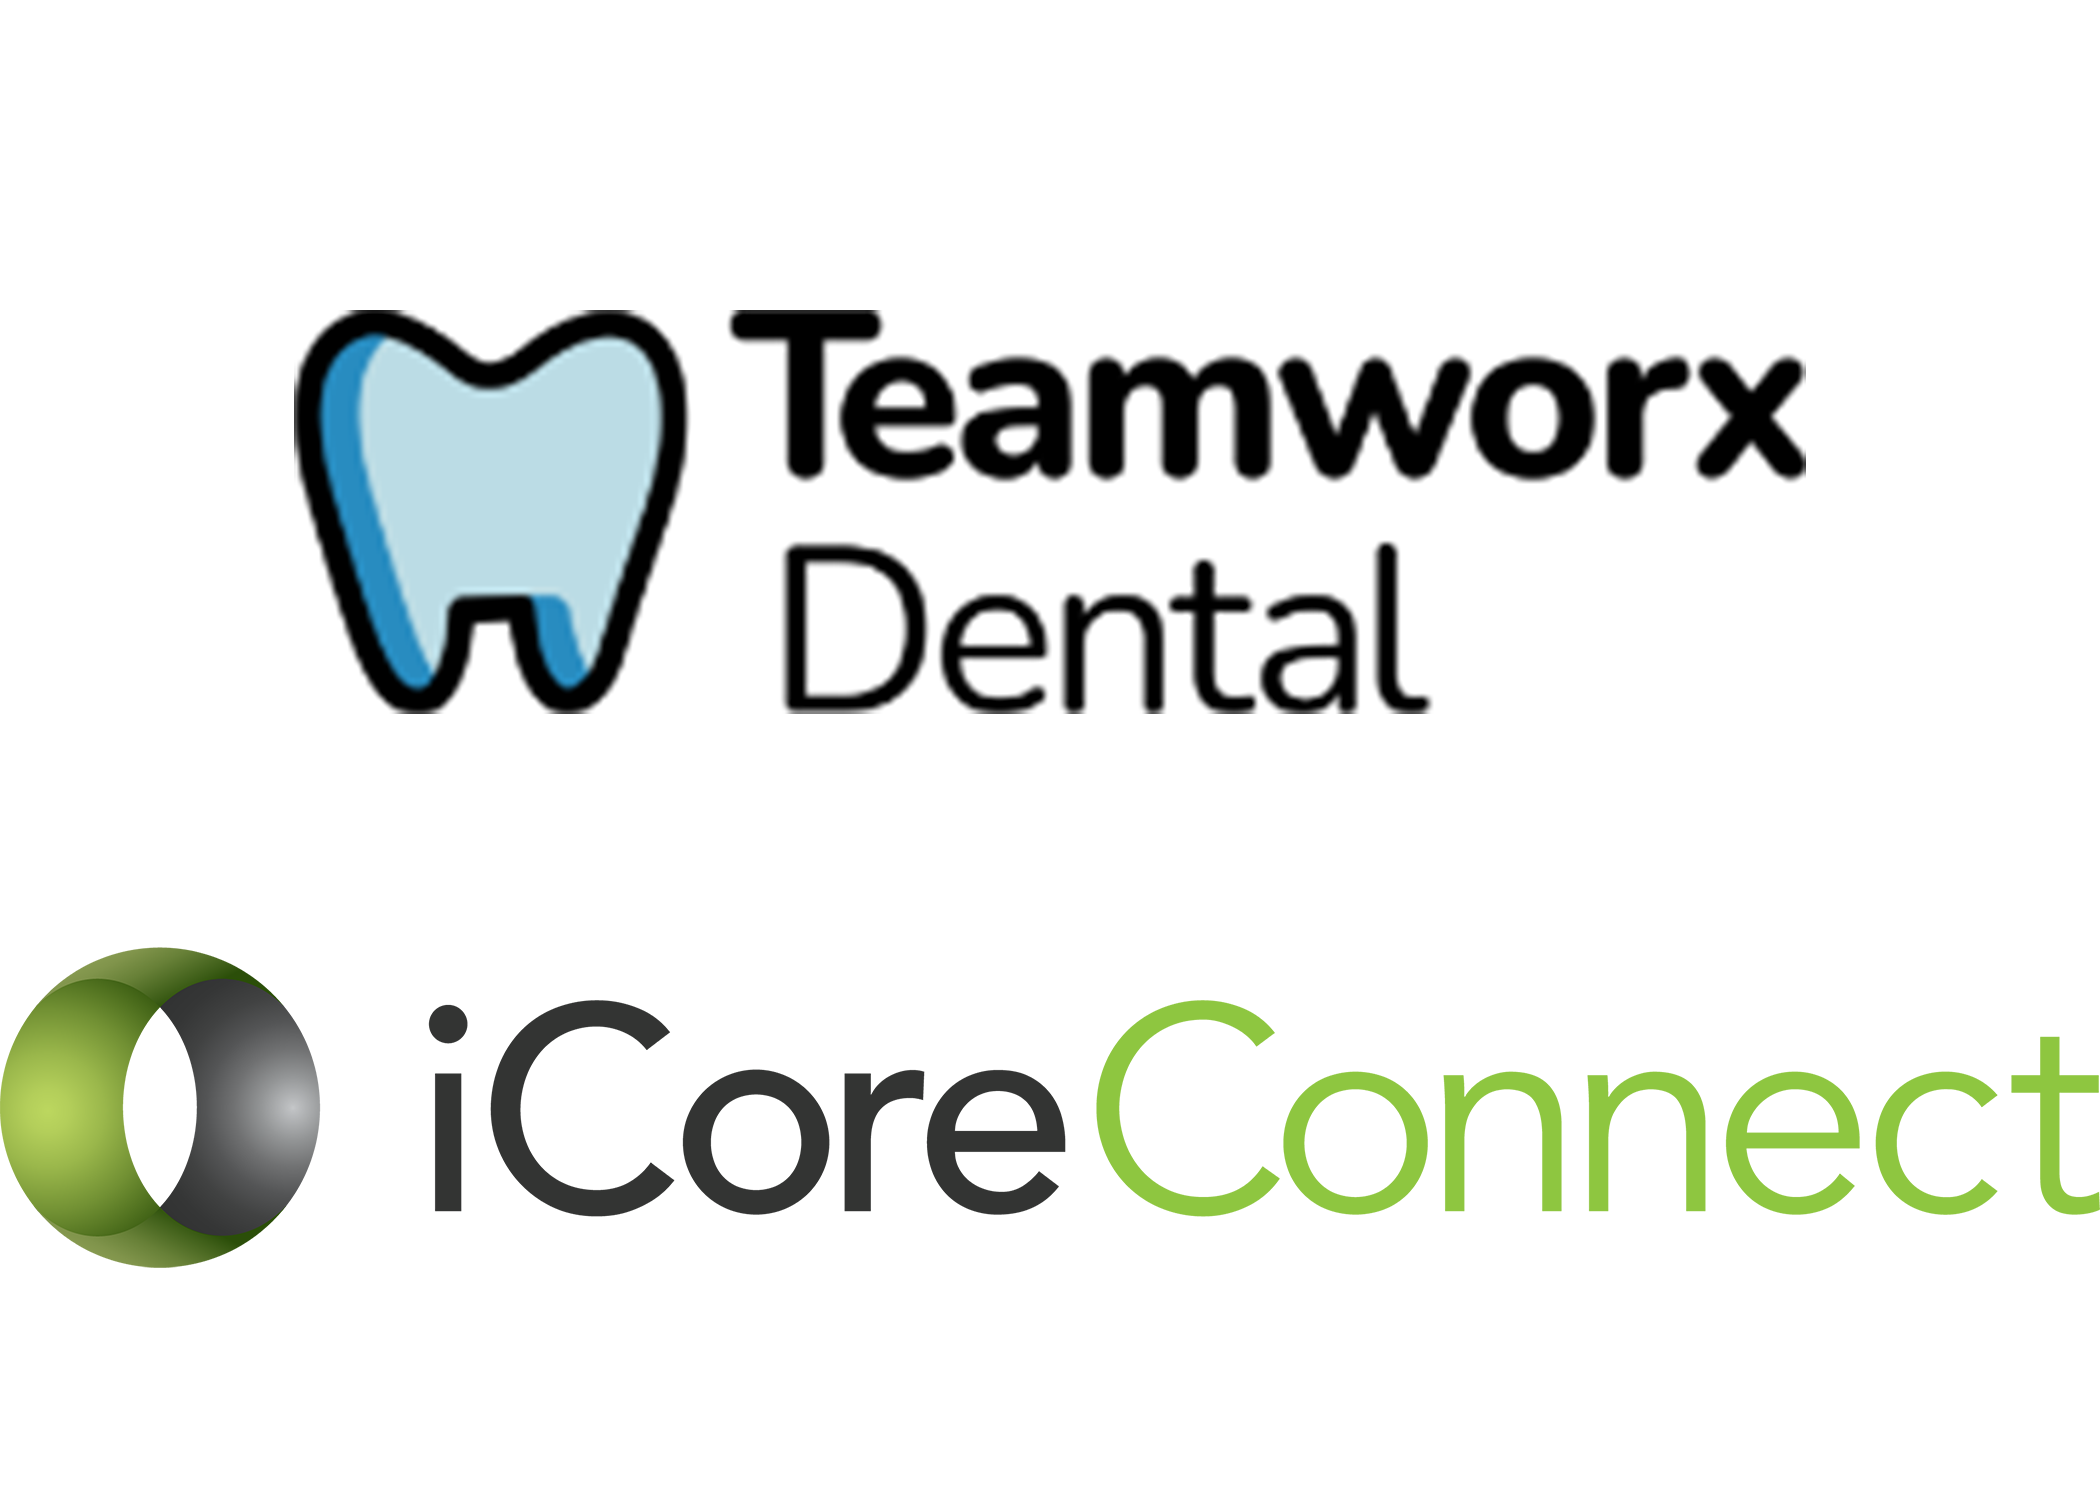 iCoreConnect Expands Healthcare Software Portfolio with Acquisition of Teamworx Dental